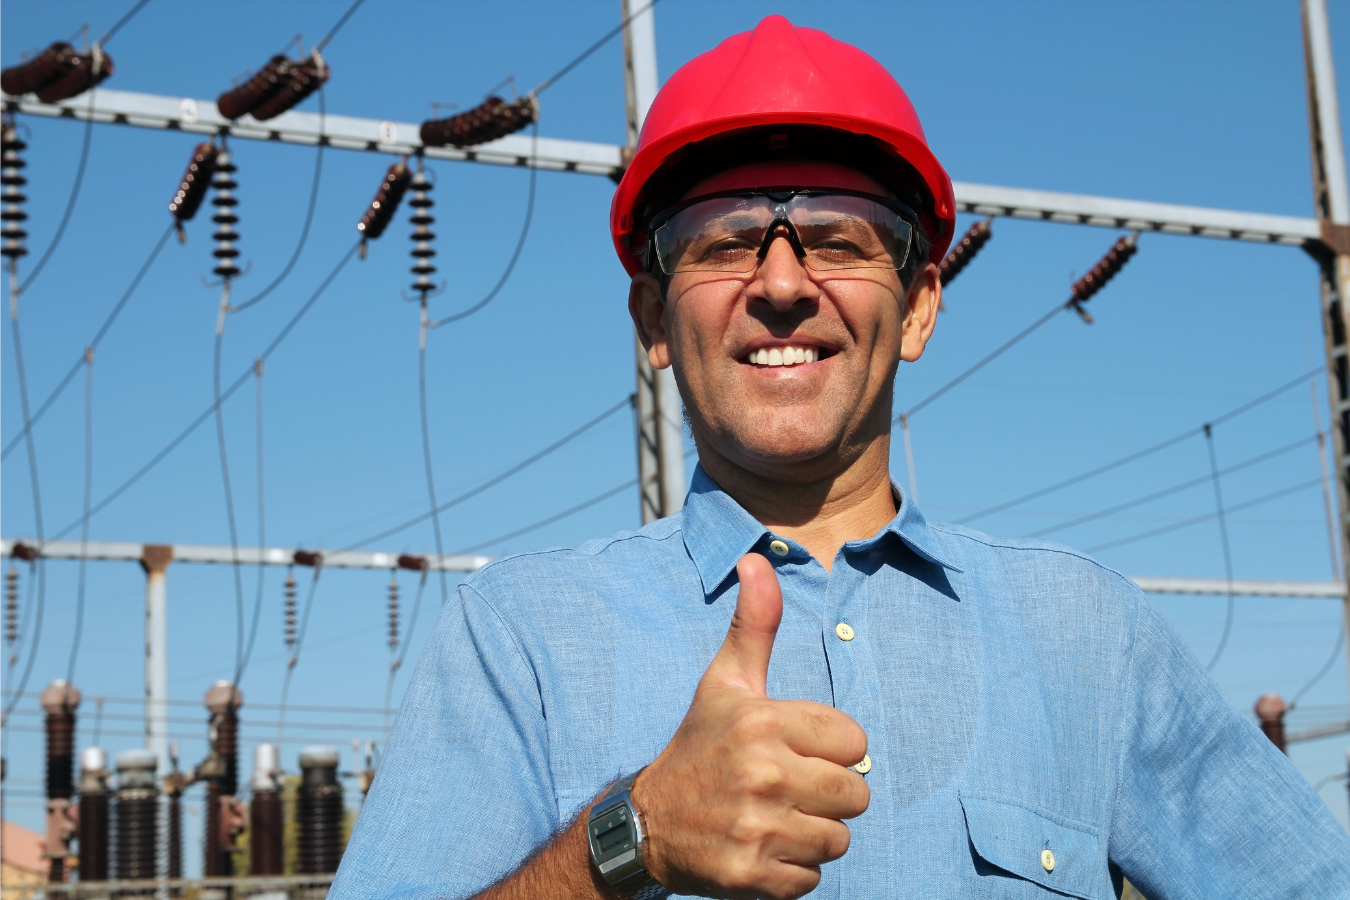 Is Electric Utilities Central A Good Career Path